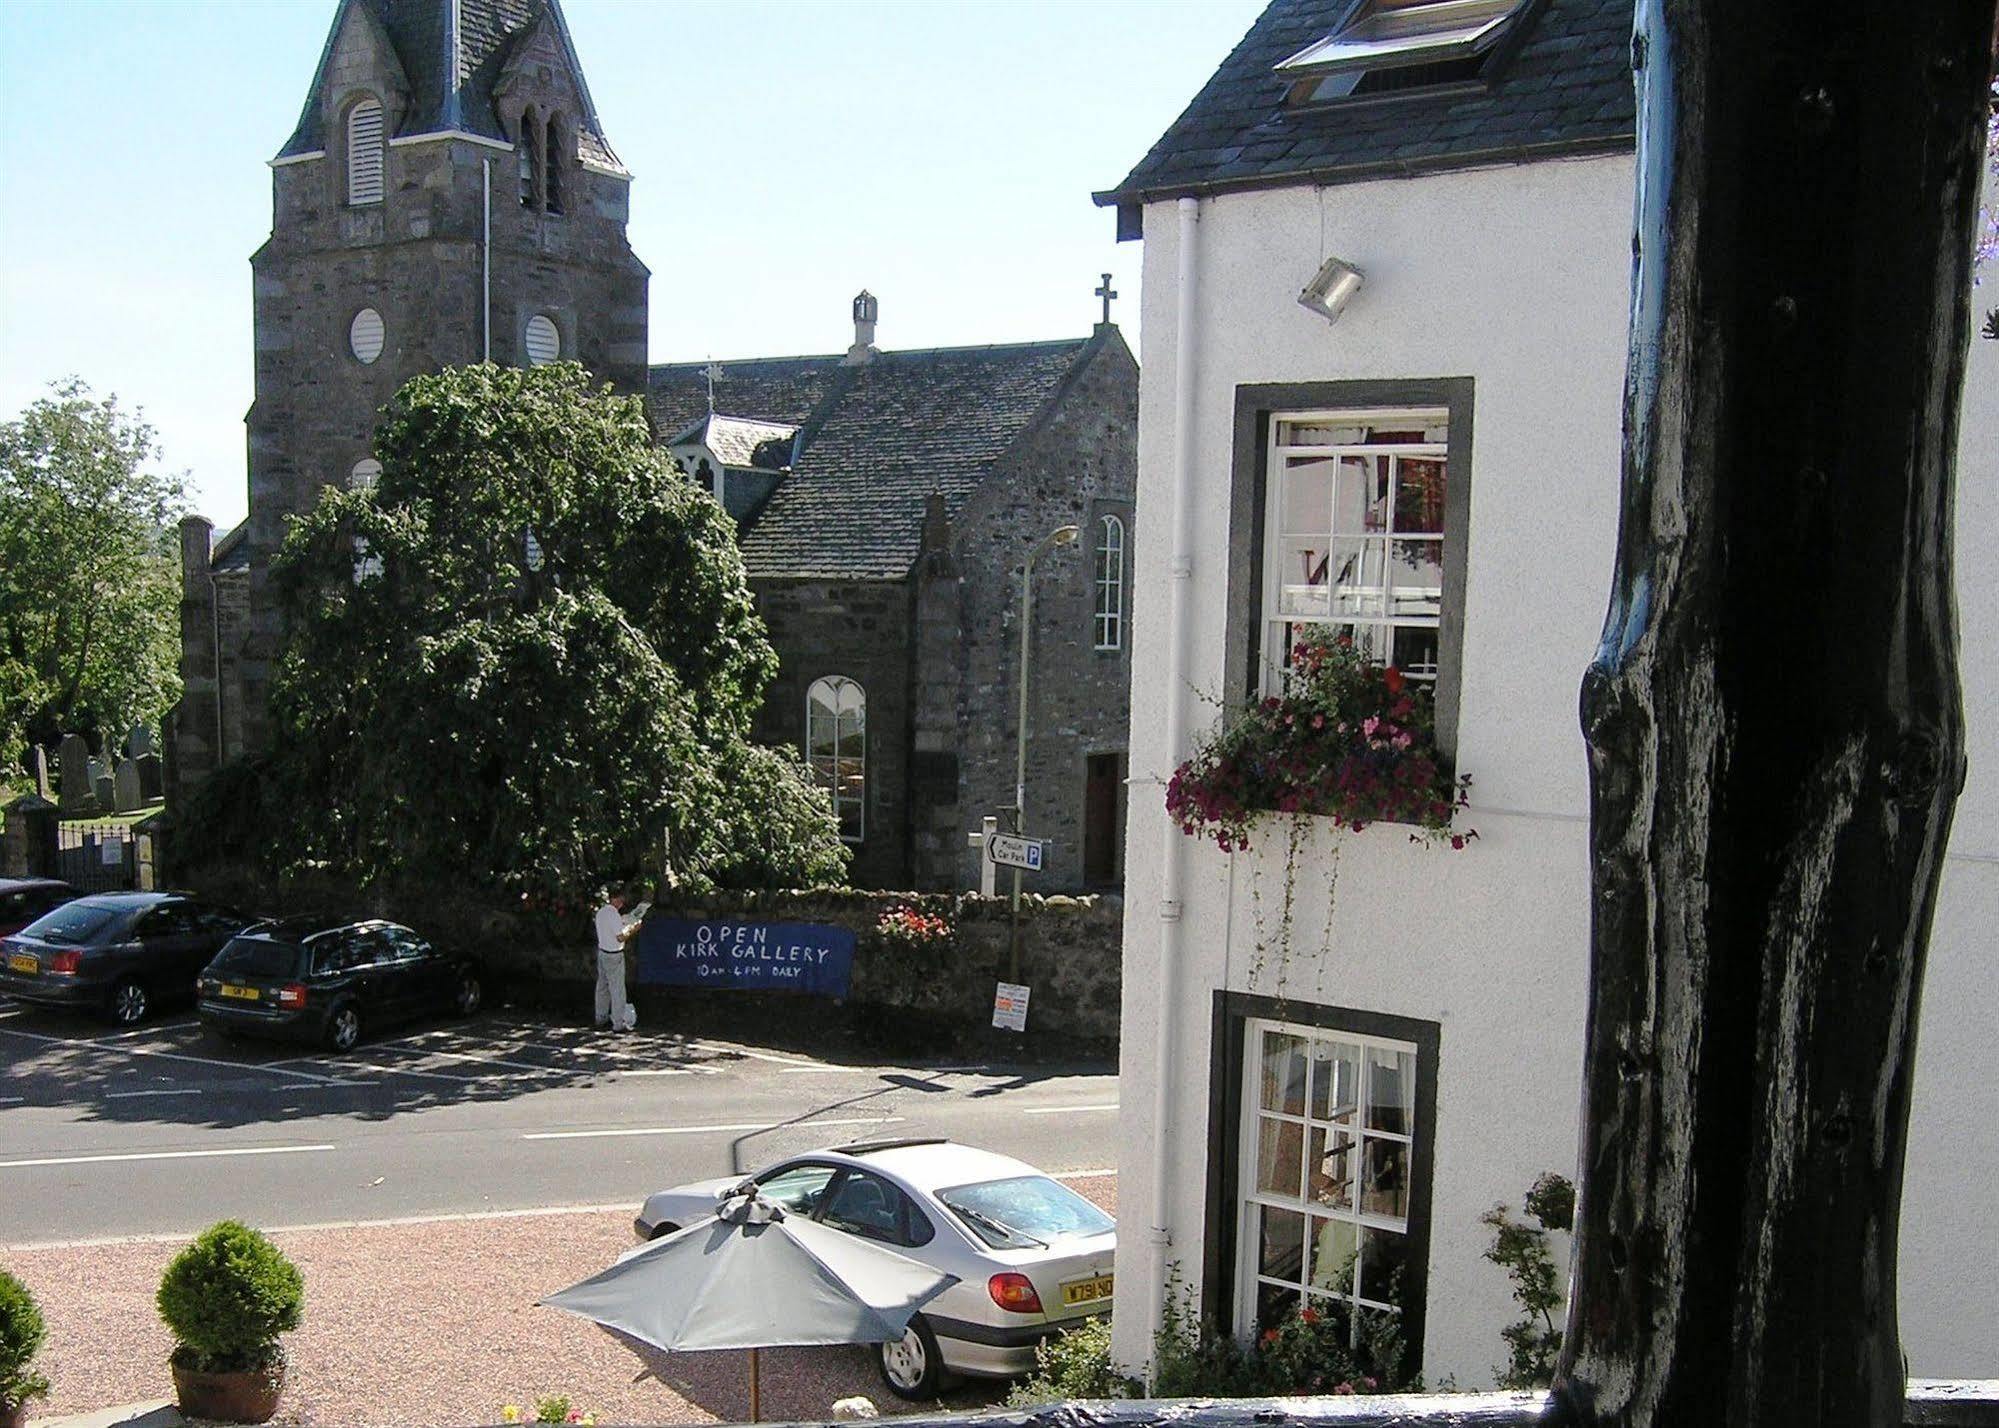 Moulin Hotel Pitlochry Exterior foto